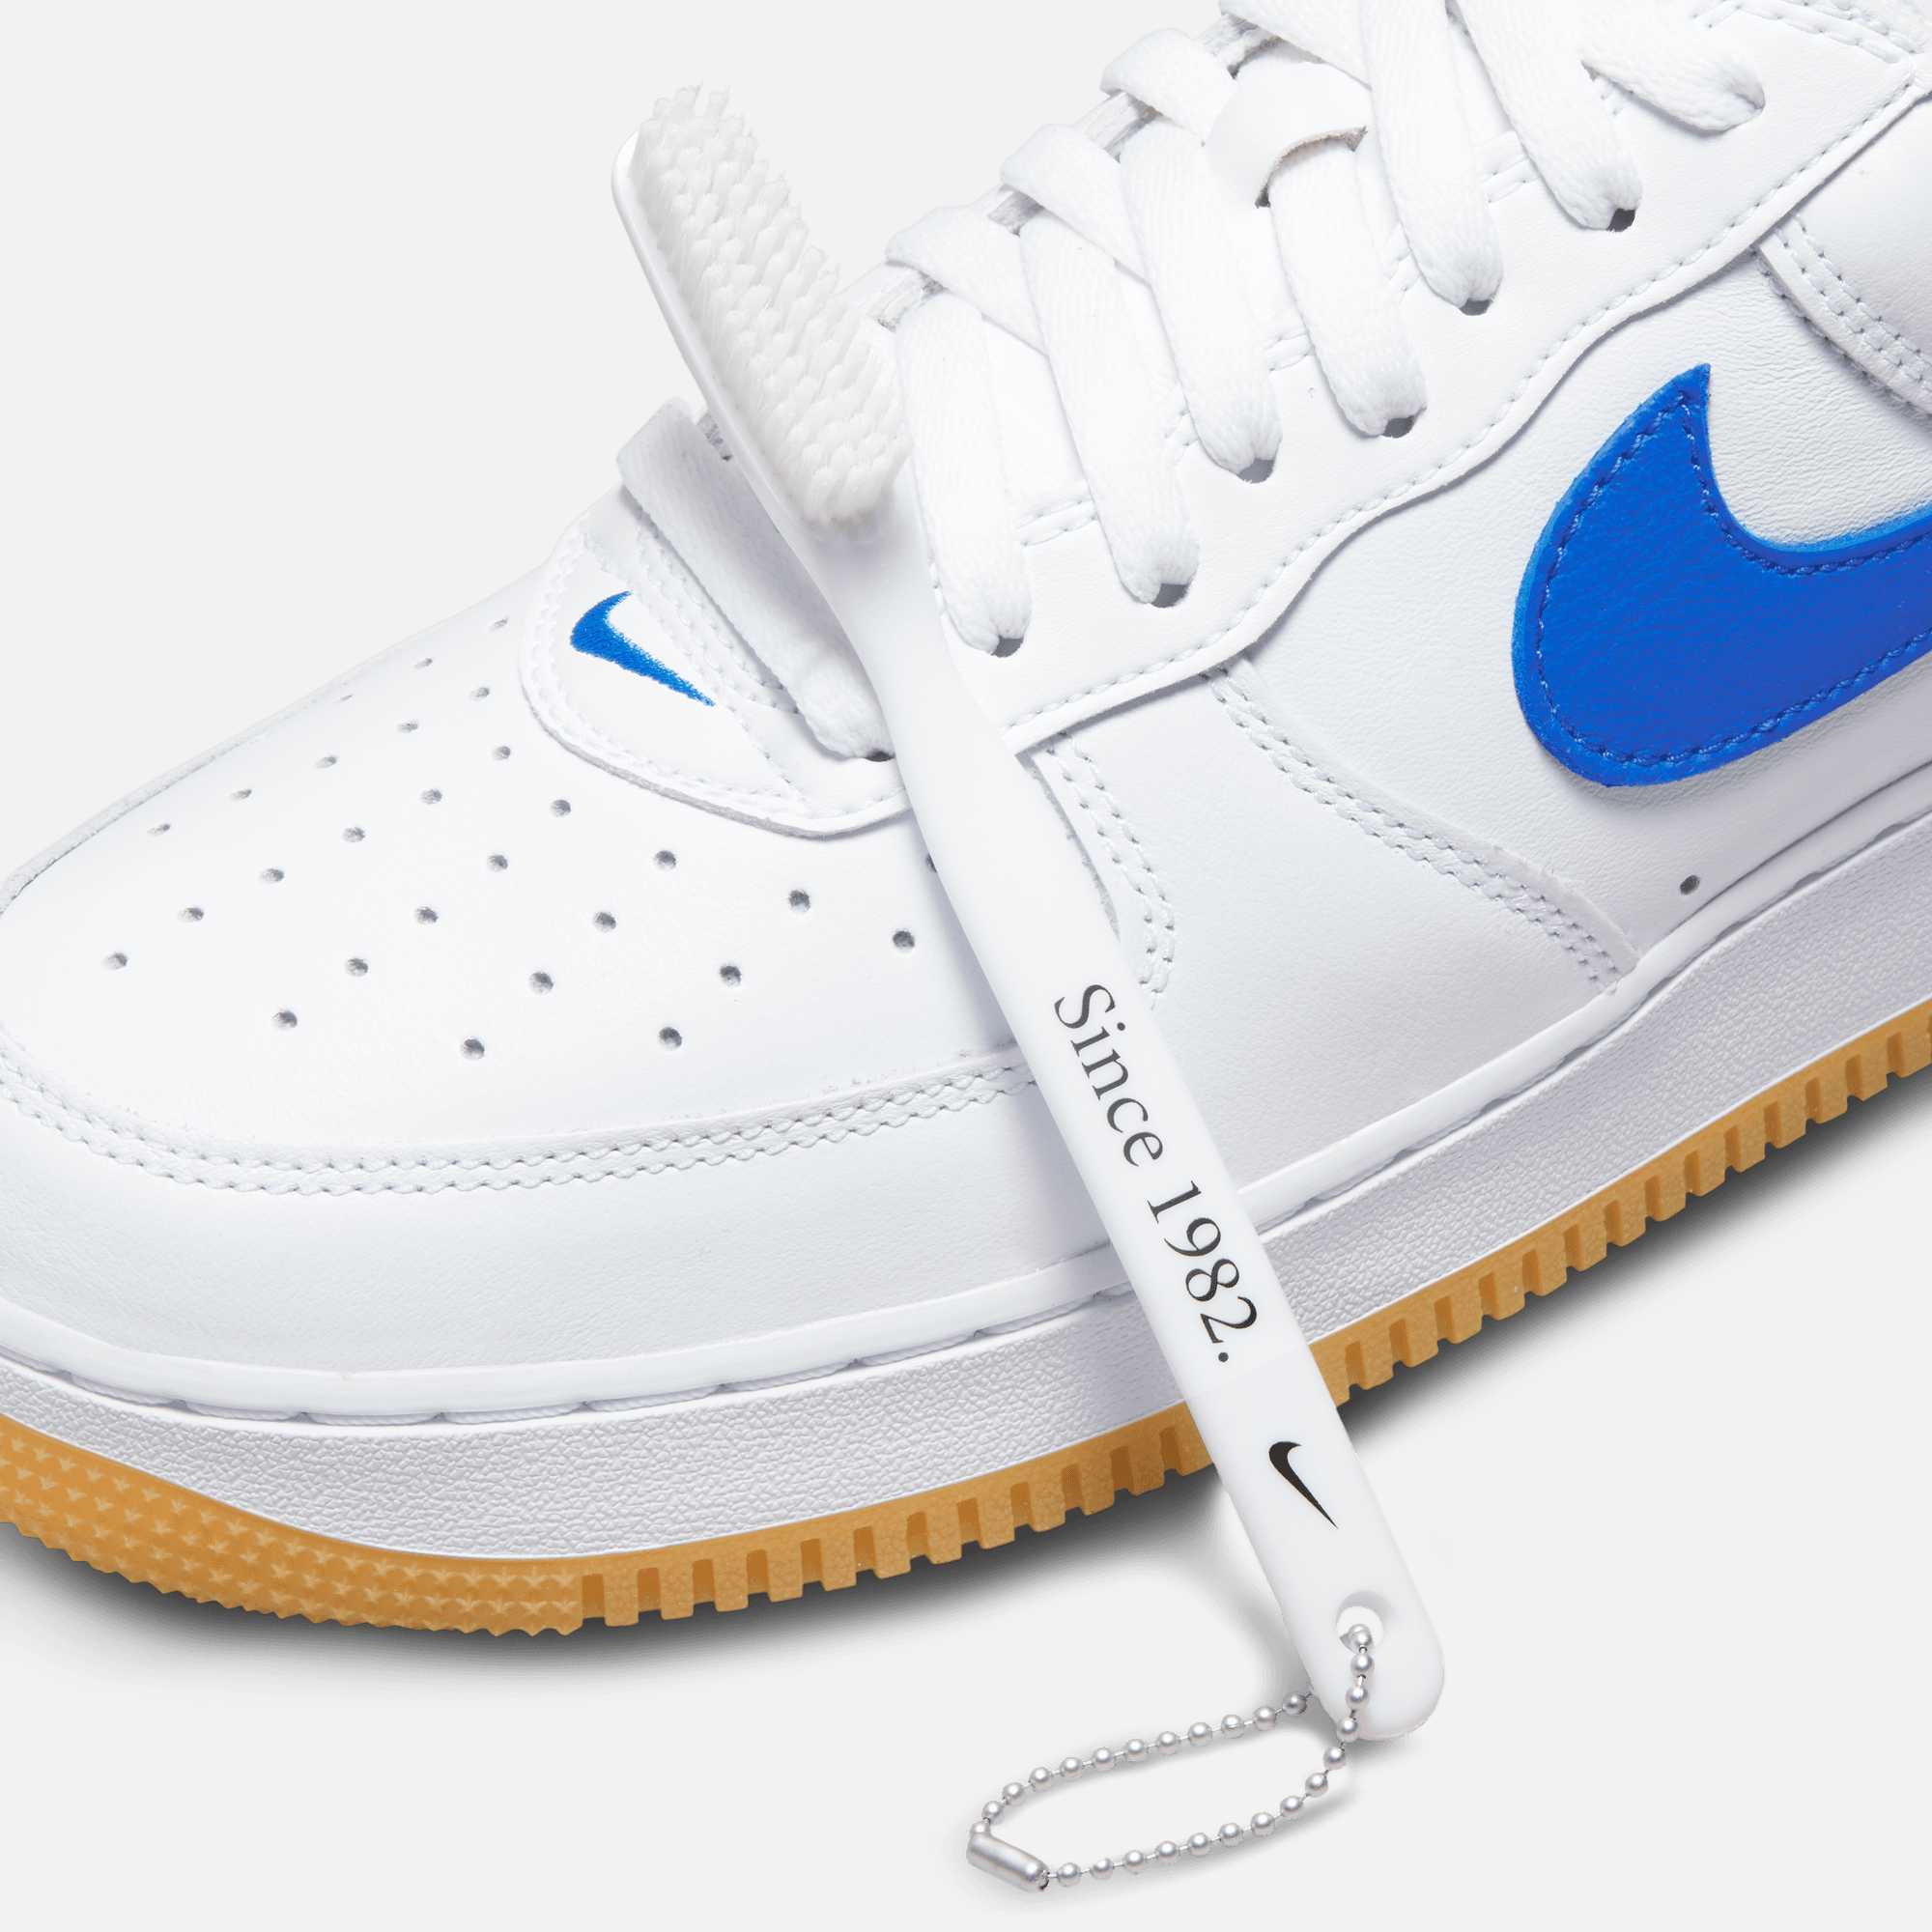 Nike Air Force 1 Low Retro 'Color of the Month' Royal Gum - Puffer Reds